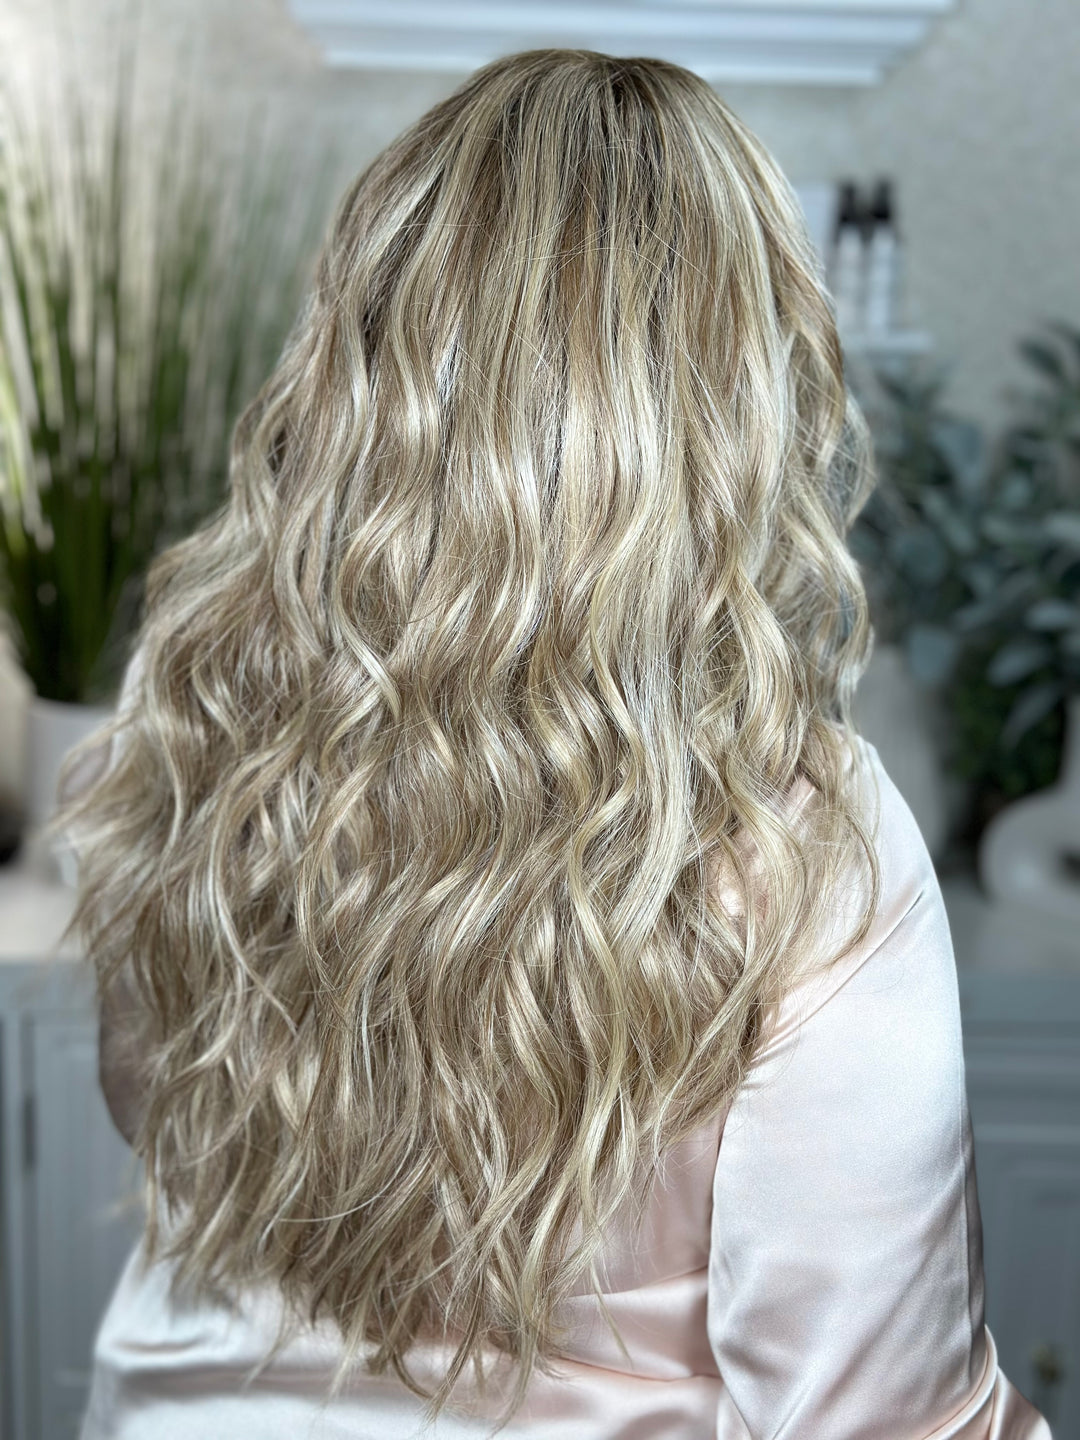 ROMANTIC GETAWAY - Frosted Blonde